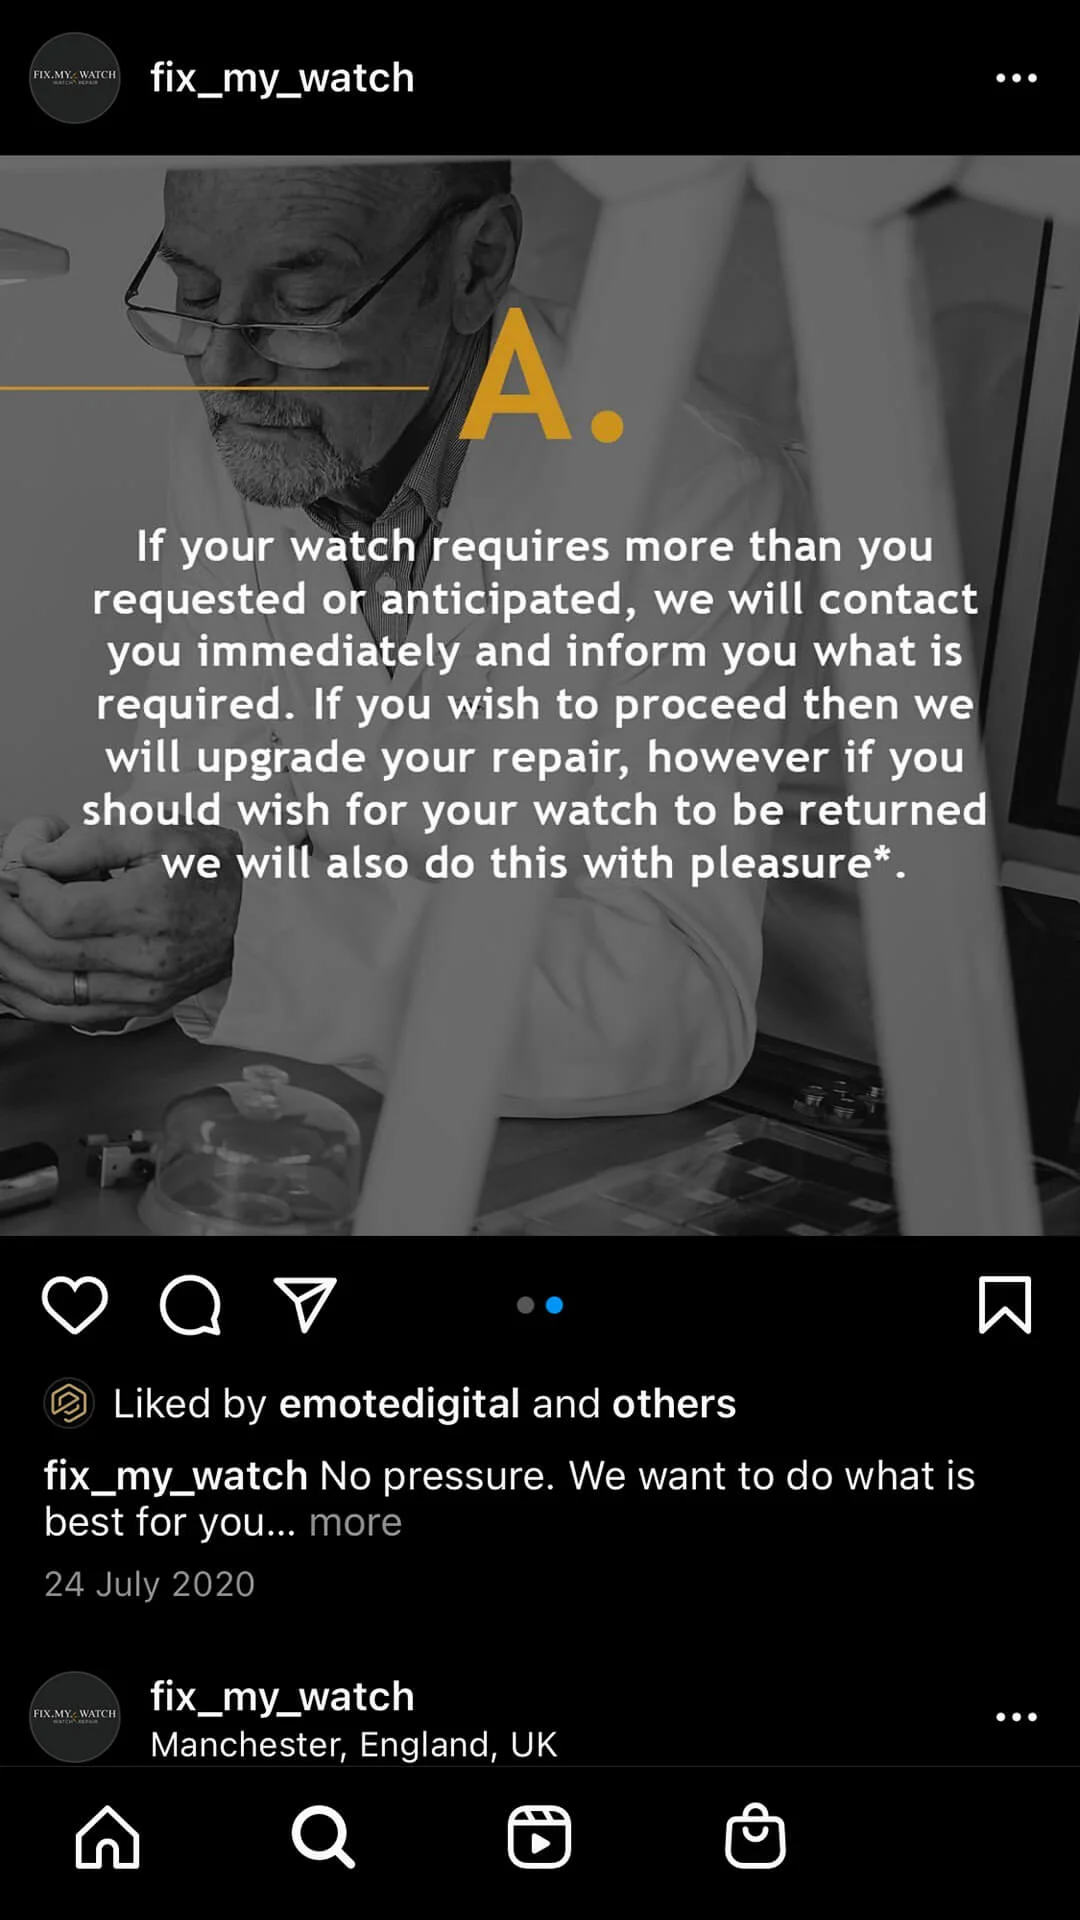 Fix My Watch Quote on Instagram Post